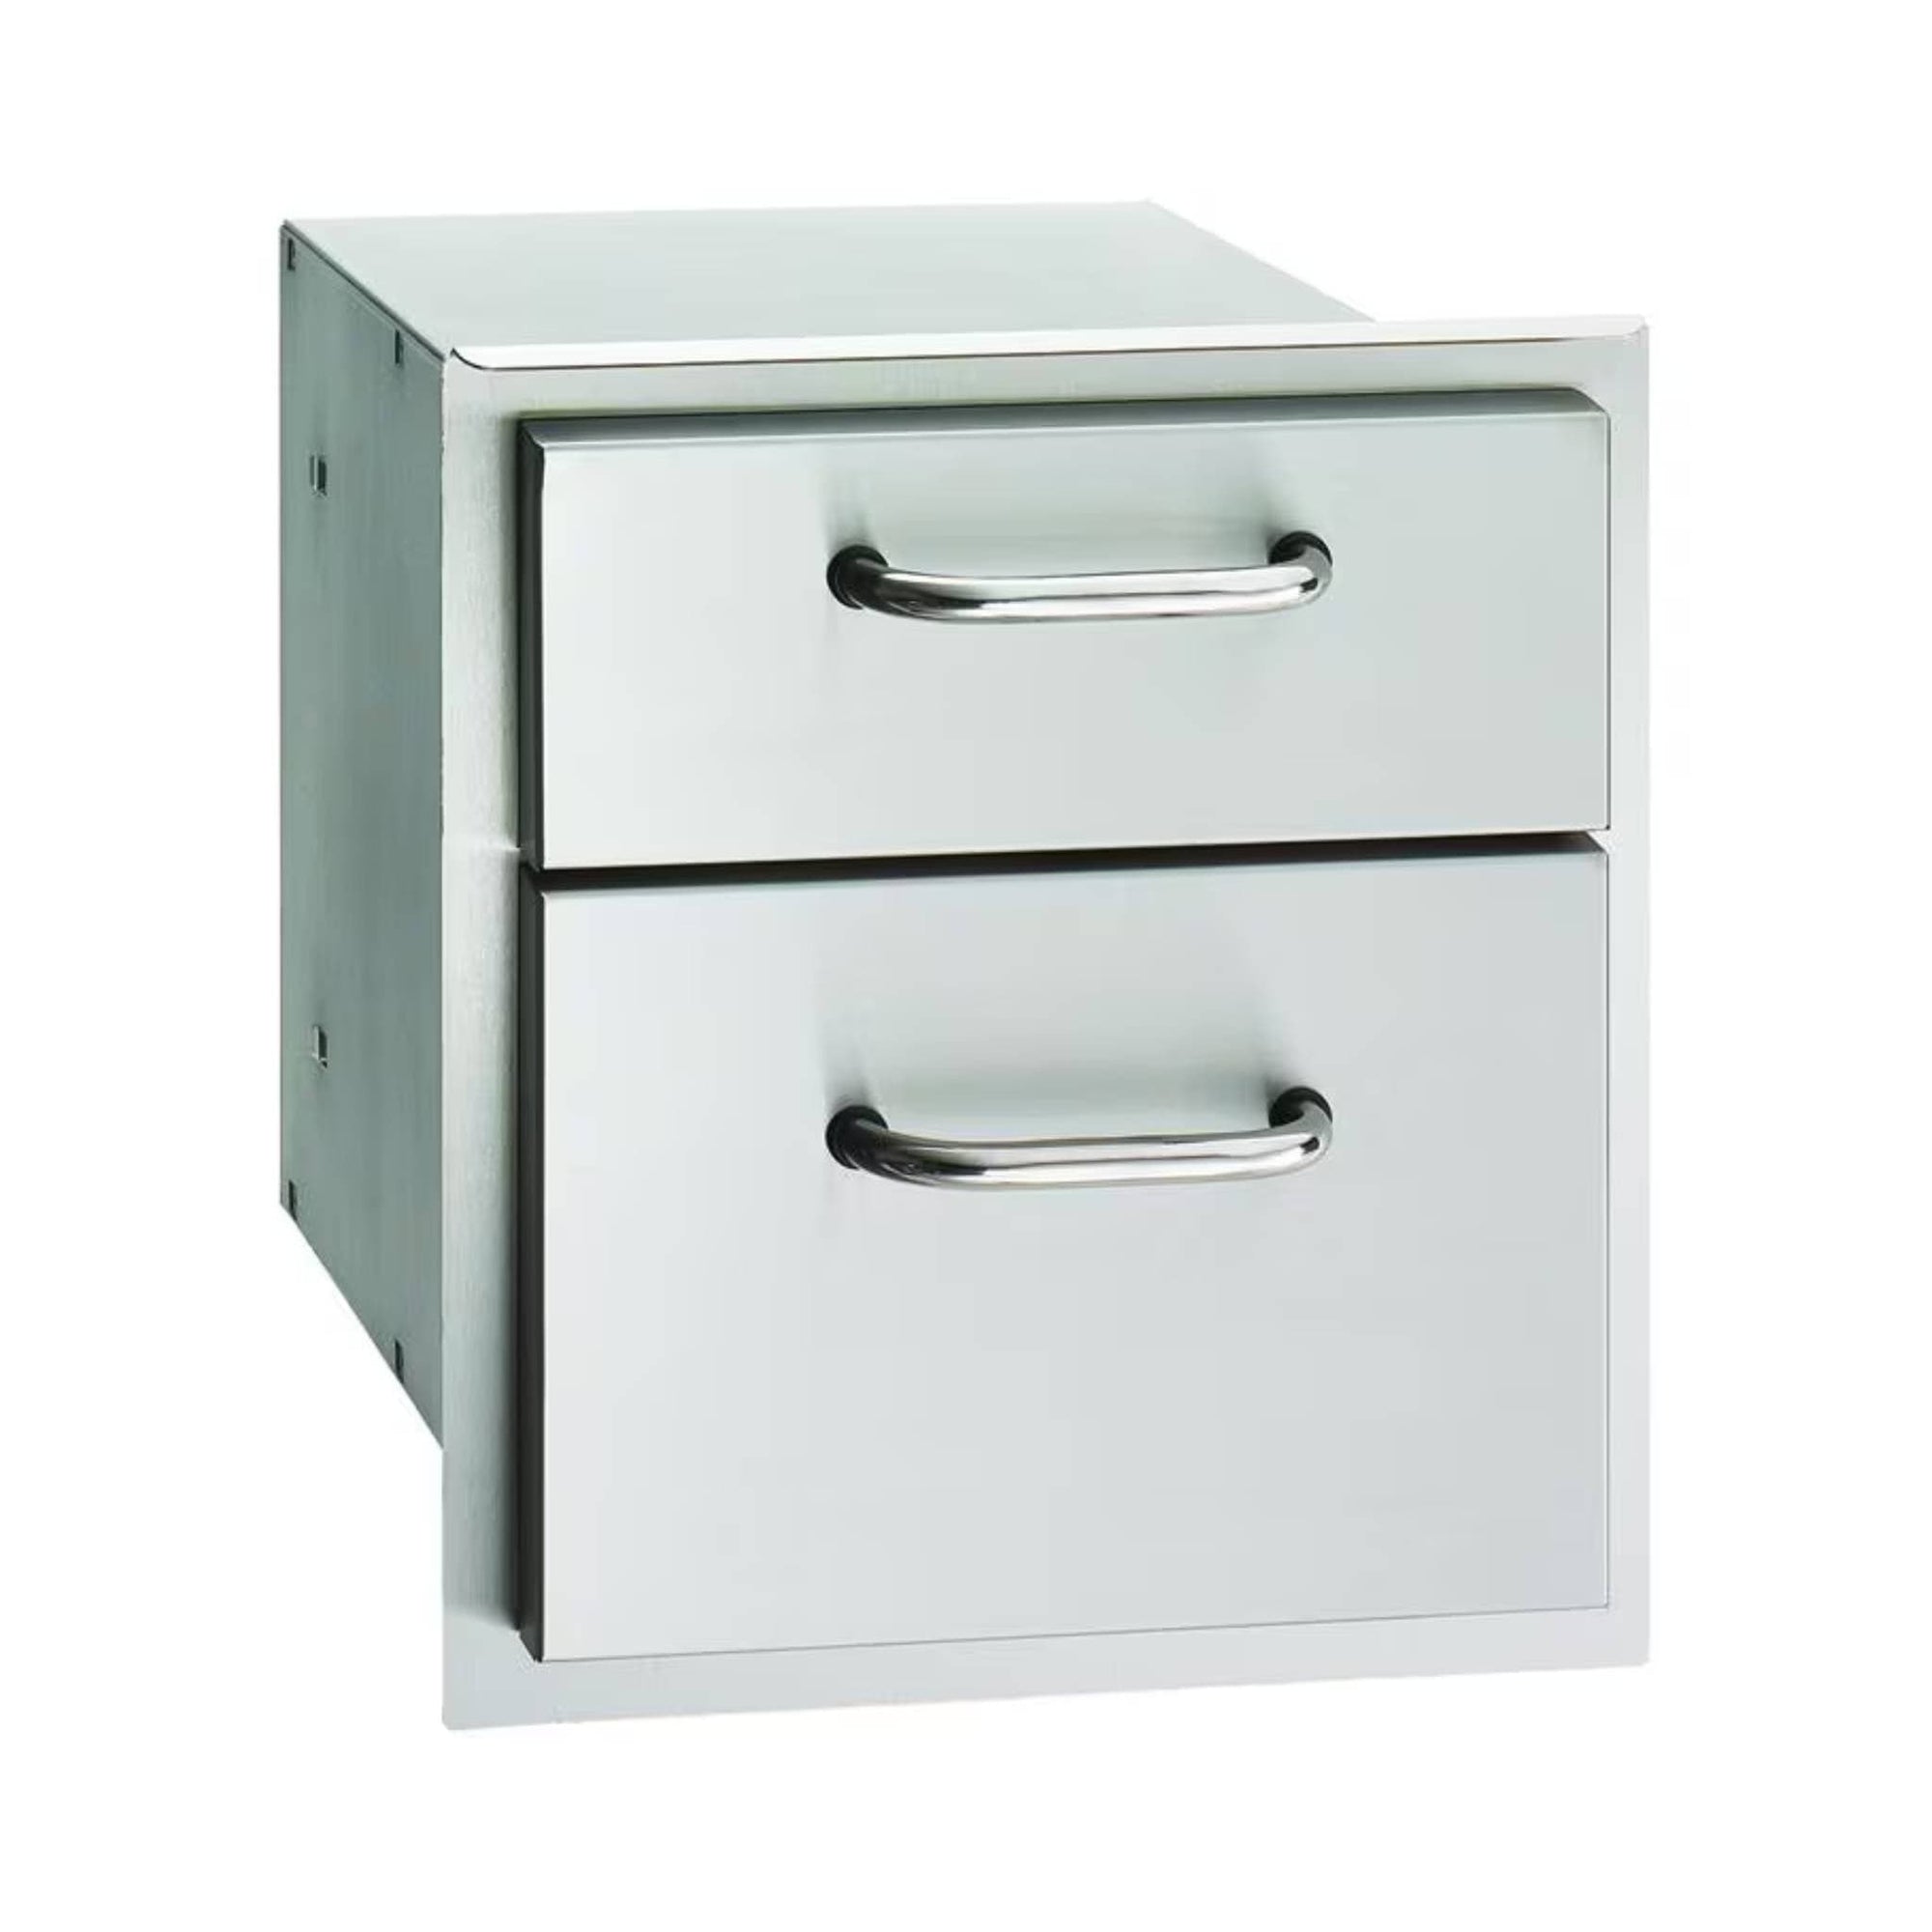 AOG 14" Double Access Drawer - Culinary Hardware